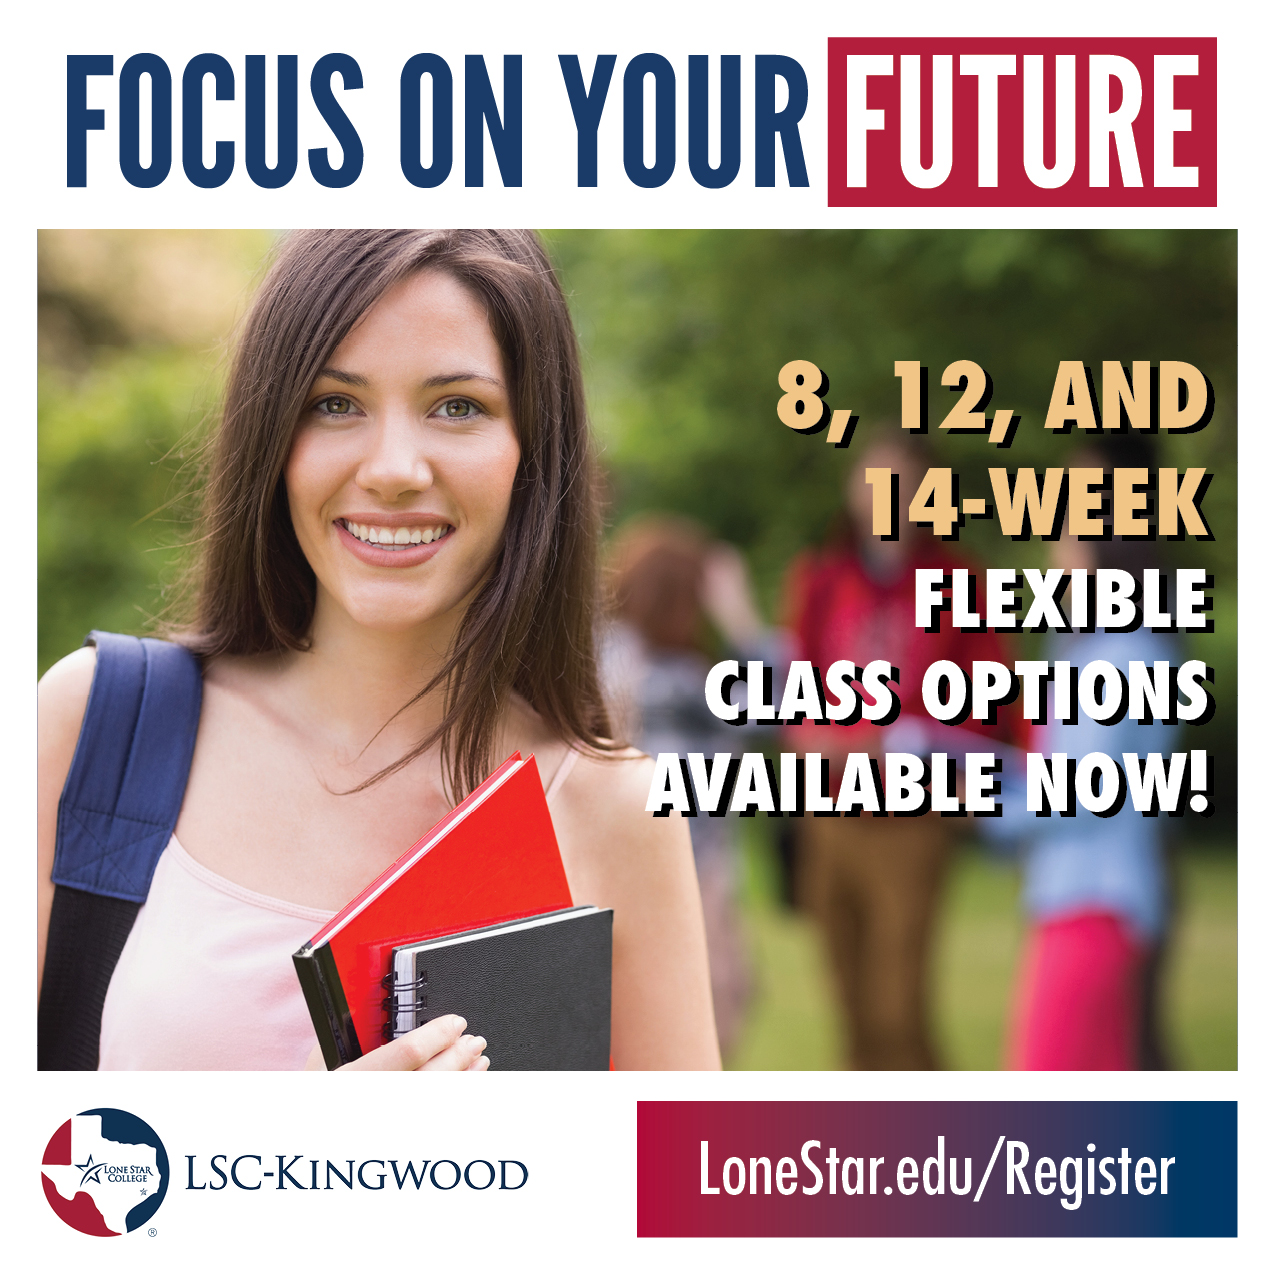 Focus On Your Future – 8, 12, and 14-Week Flexible Class Options Available Now at LSC-Kingwood! LoneStar.edu/Register